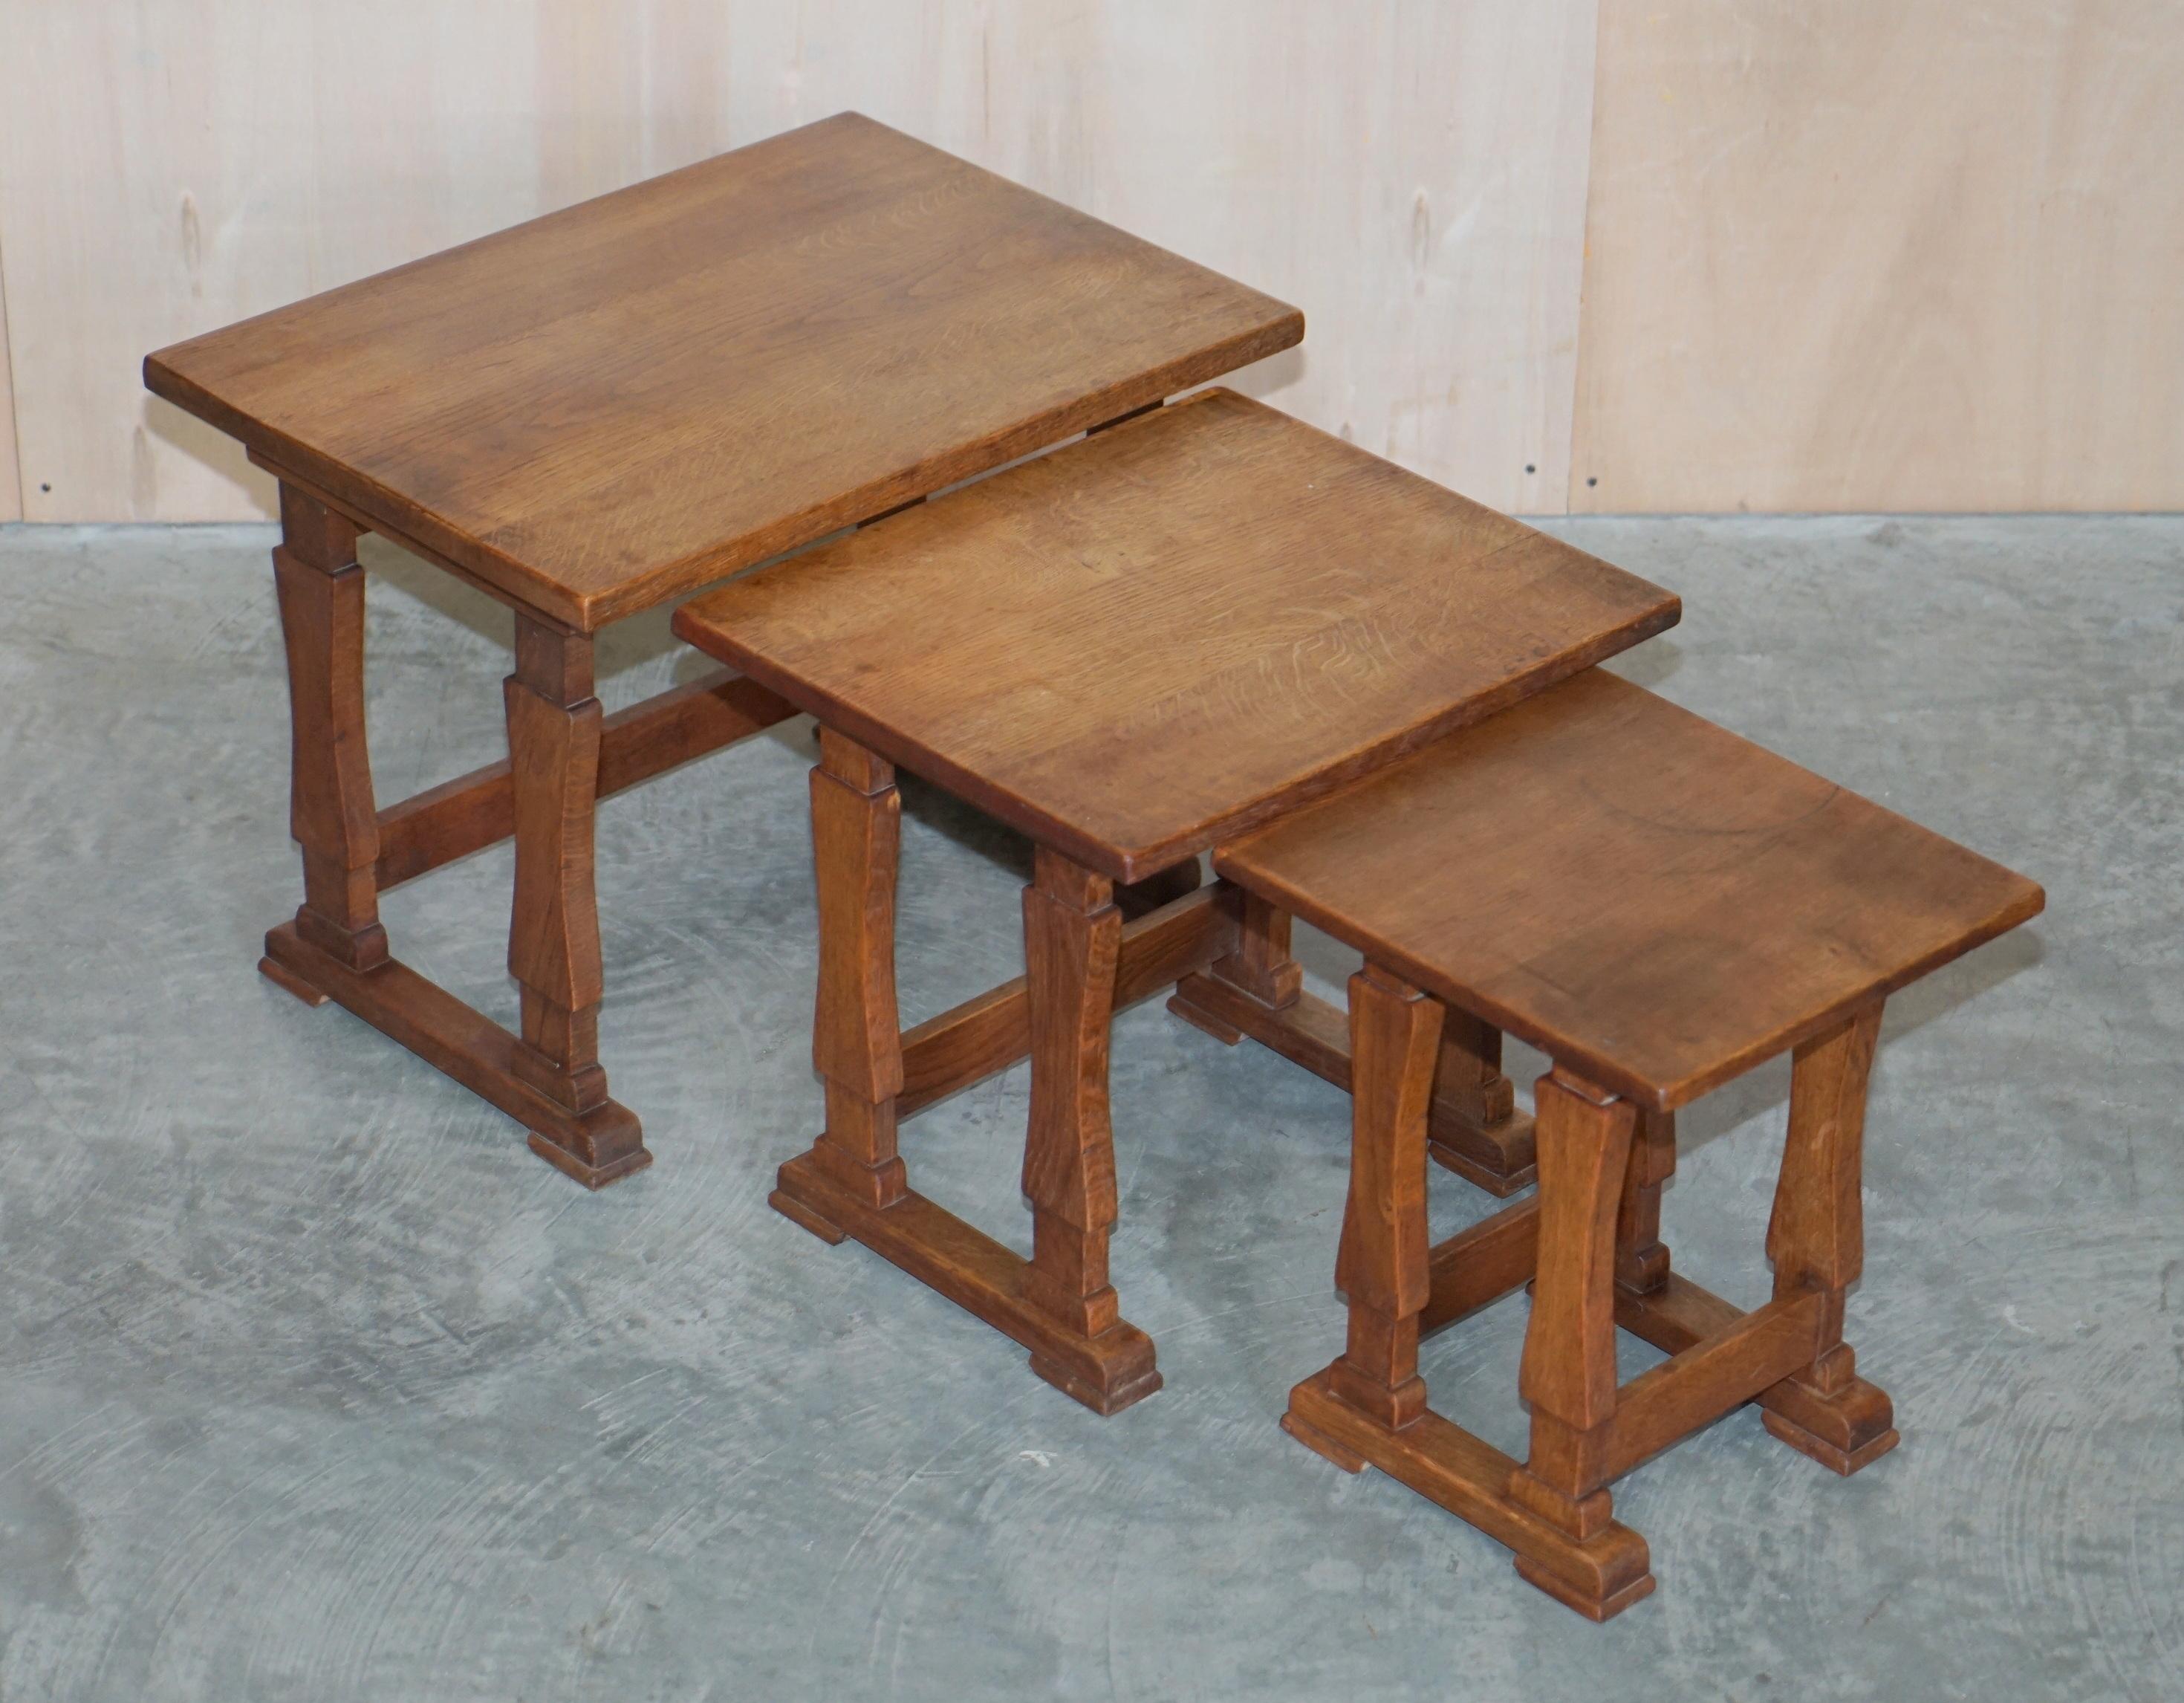 We are delighted to offer for sale this lovely vintage set of three hand made in England nest of tables in solid oak.

A good looking, well made and decorative suite, each table has a lovely patinated top, they stack perfectly away, they are very